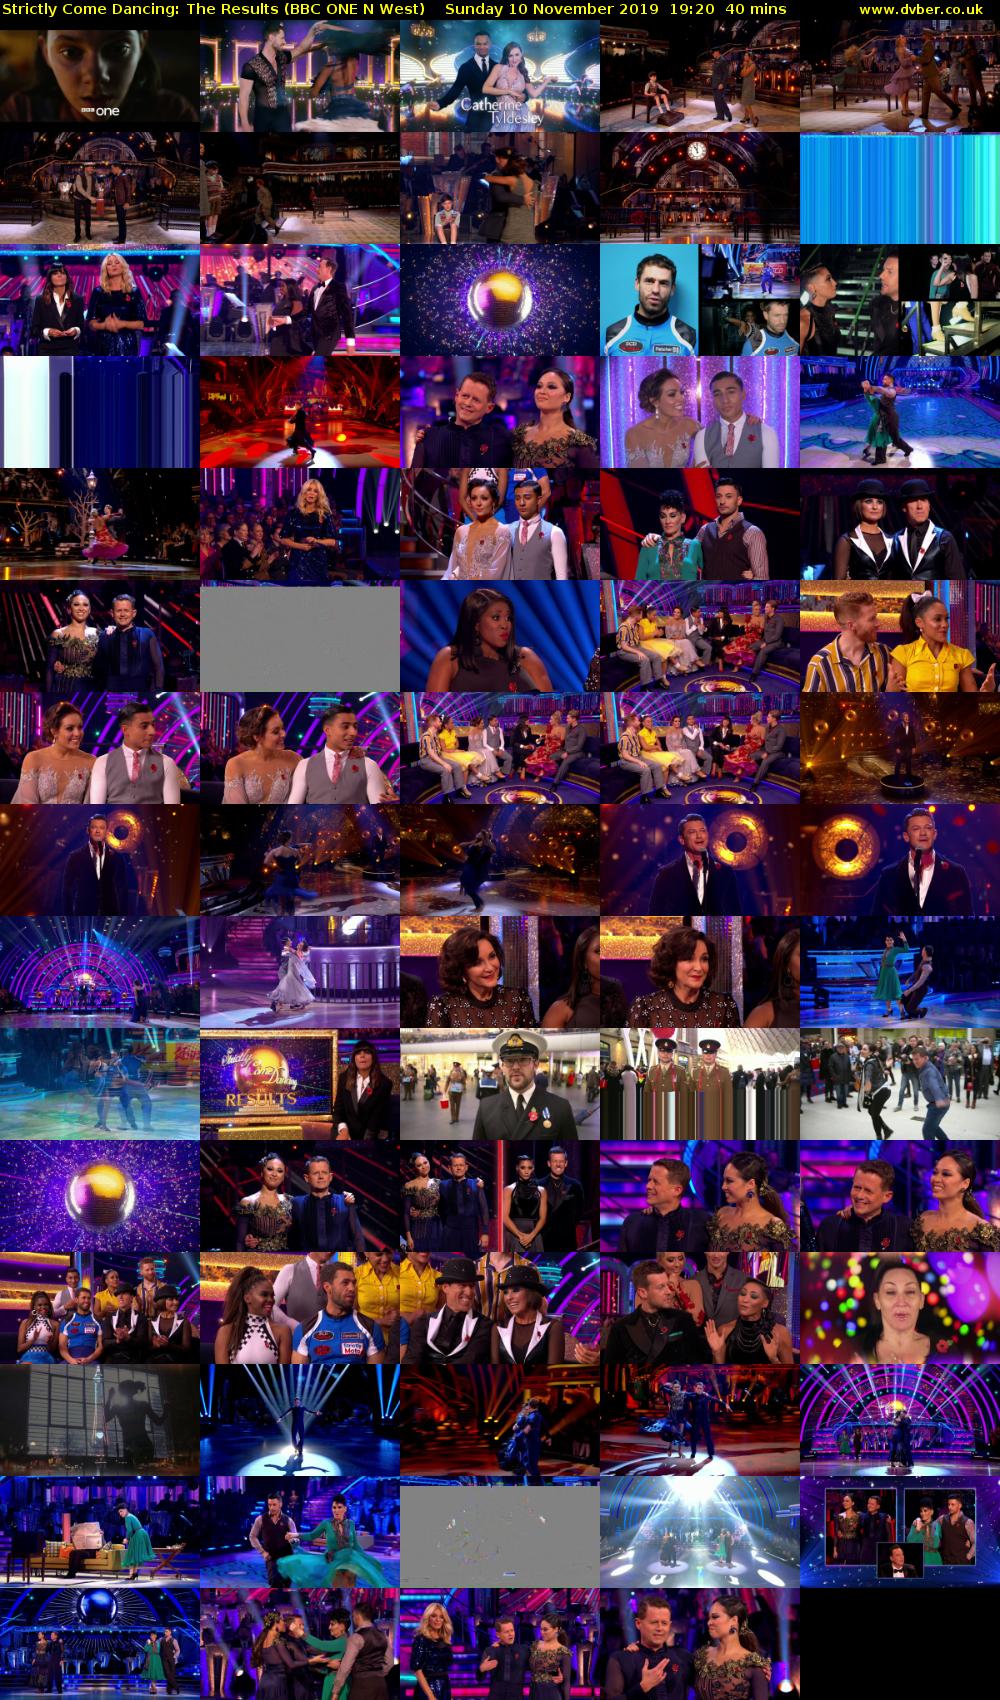 Strictly Come Dancing: The Results (BBC ONE N West) Sunday 10 November 2019 19:20 - 20:00